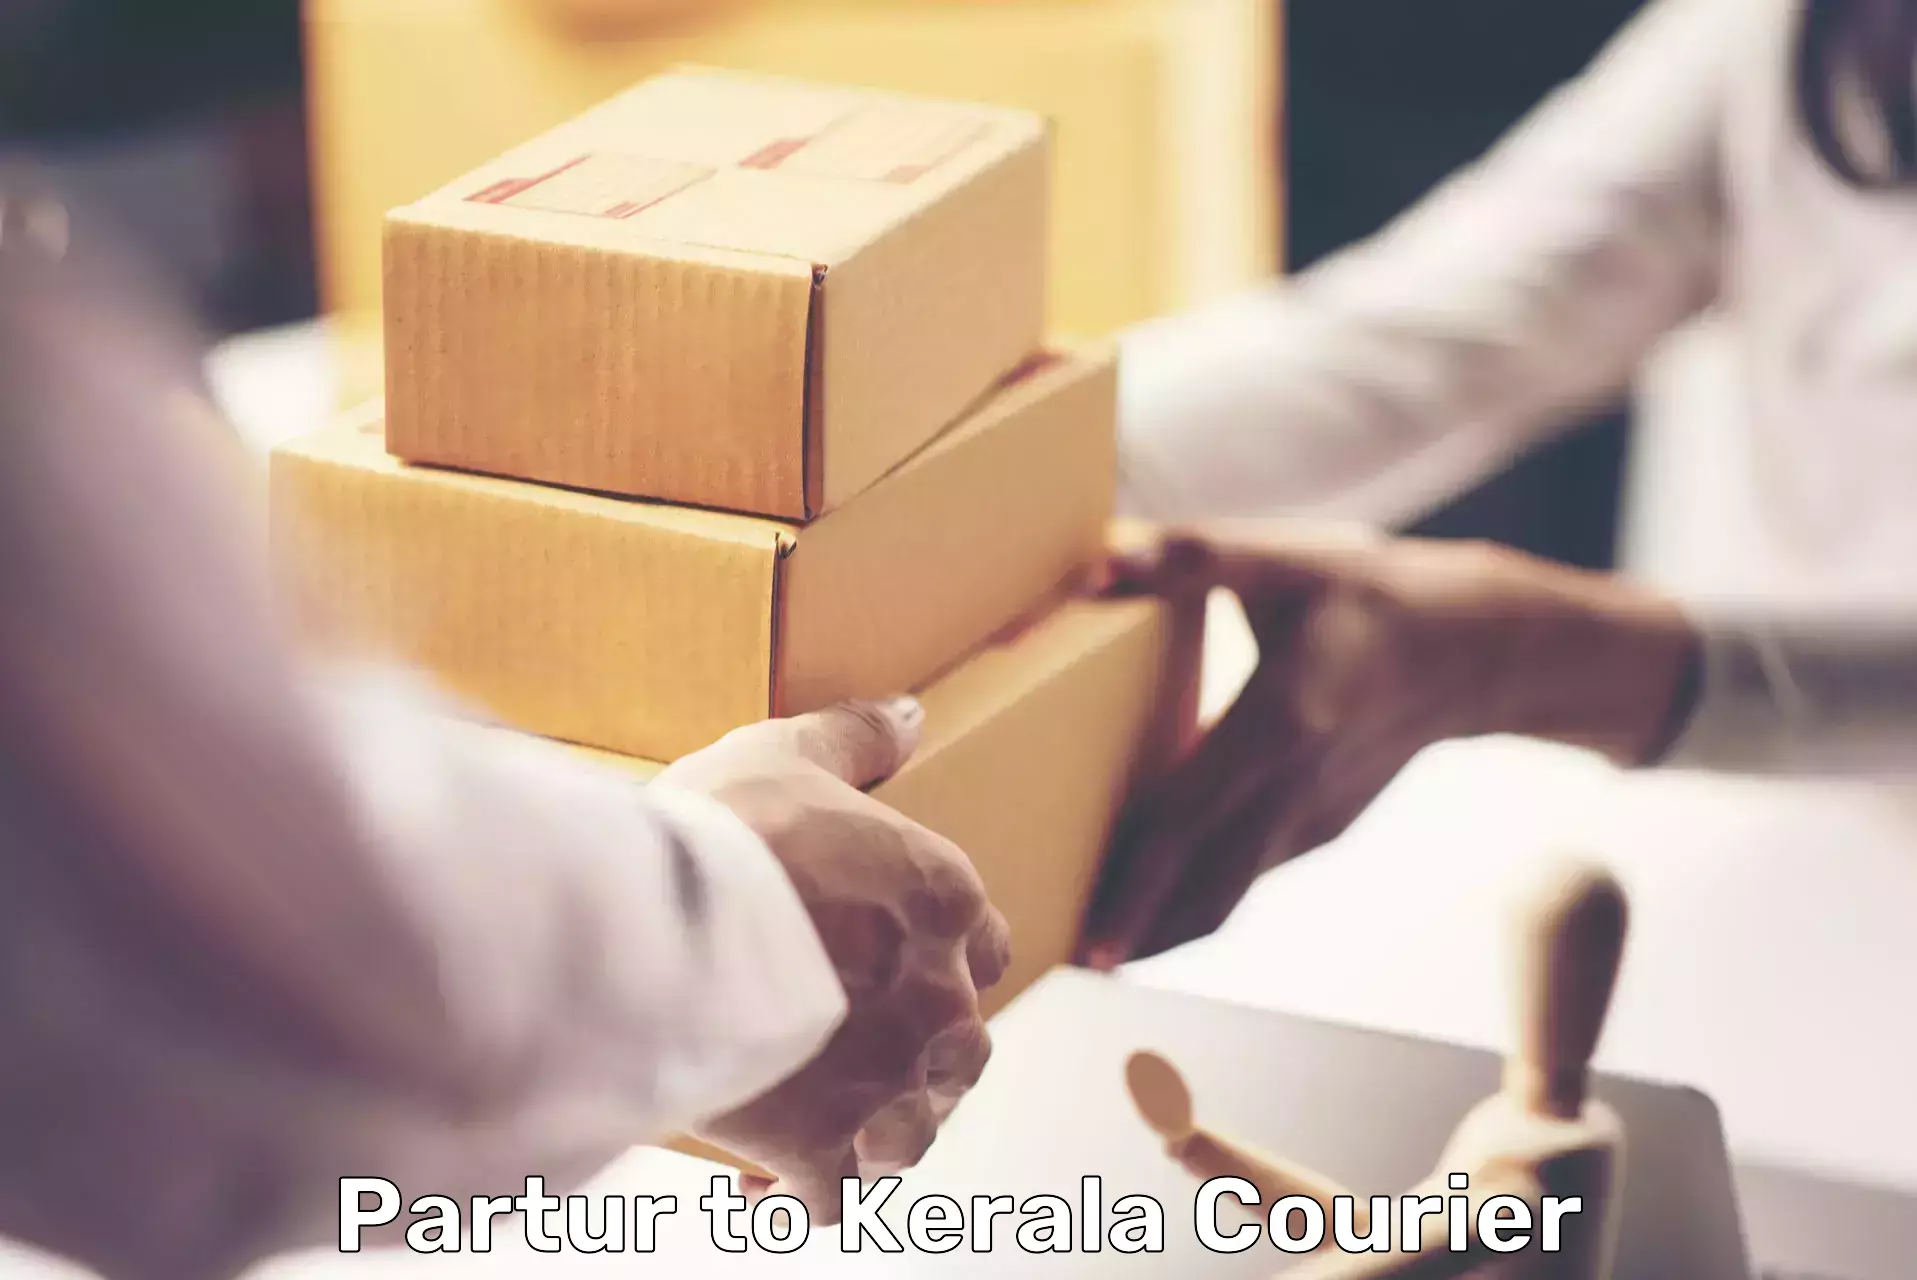 Global shipping solutions in Partur to Kerala